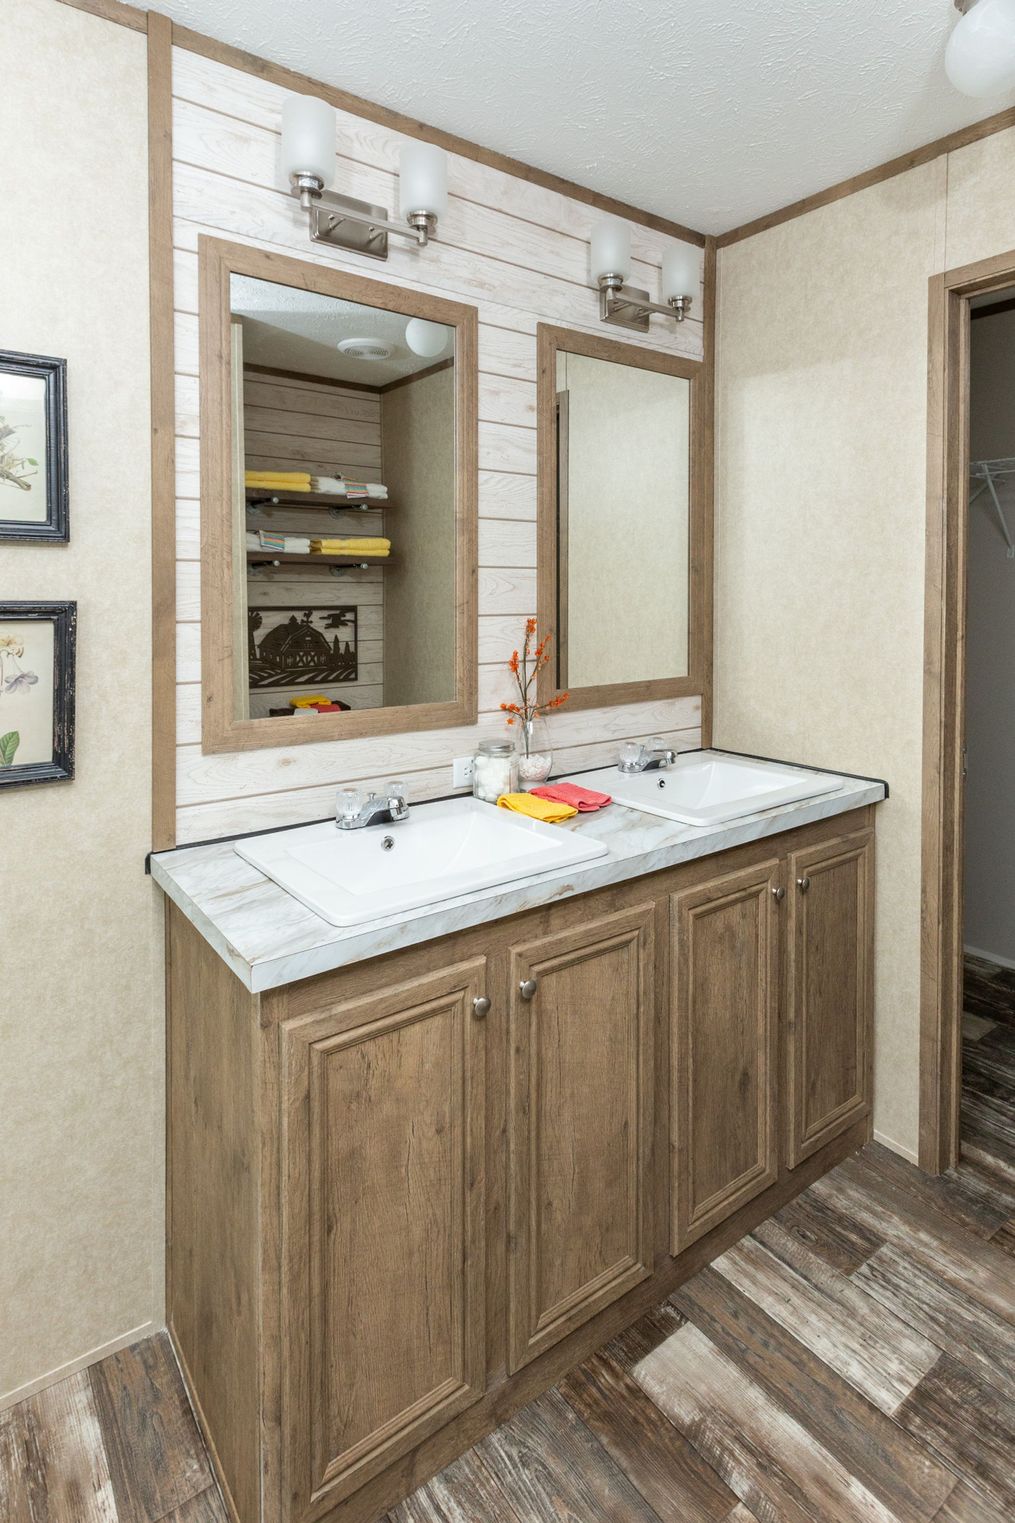 The THE RANCH HOUSE Master Bathroom. This Manufactured Mobile Home features 3 bedrooms and 2 baths.